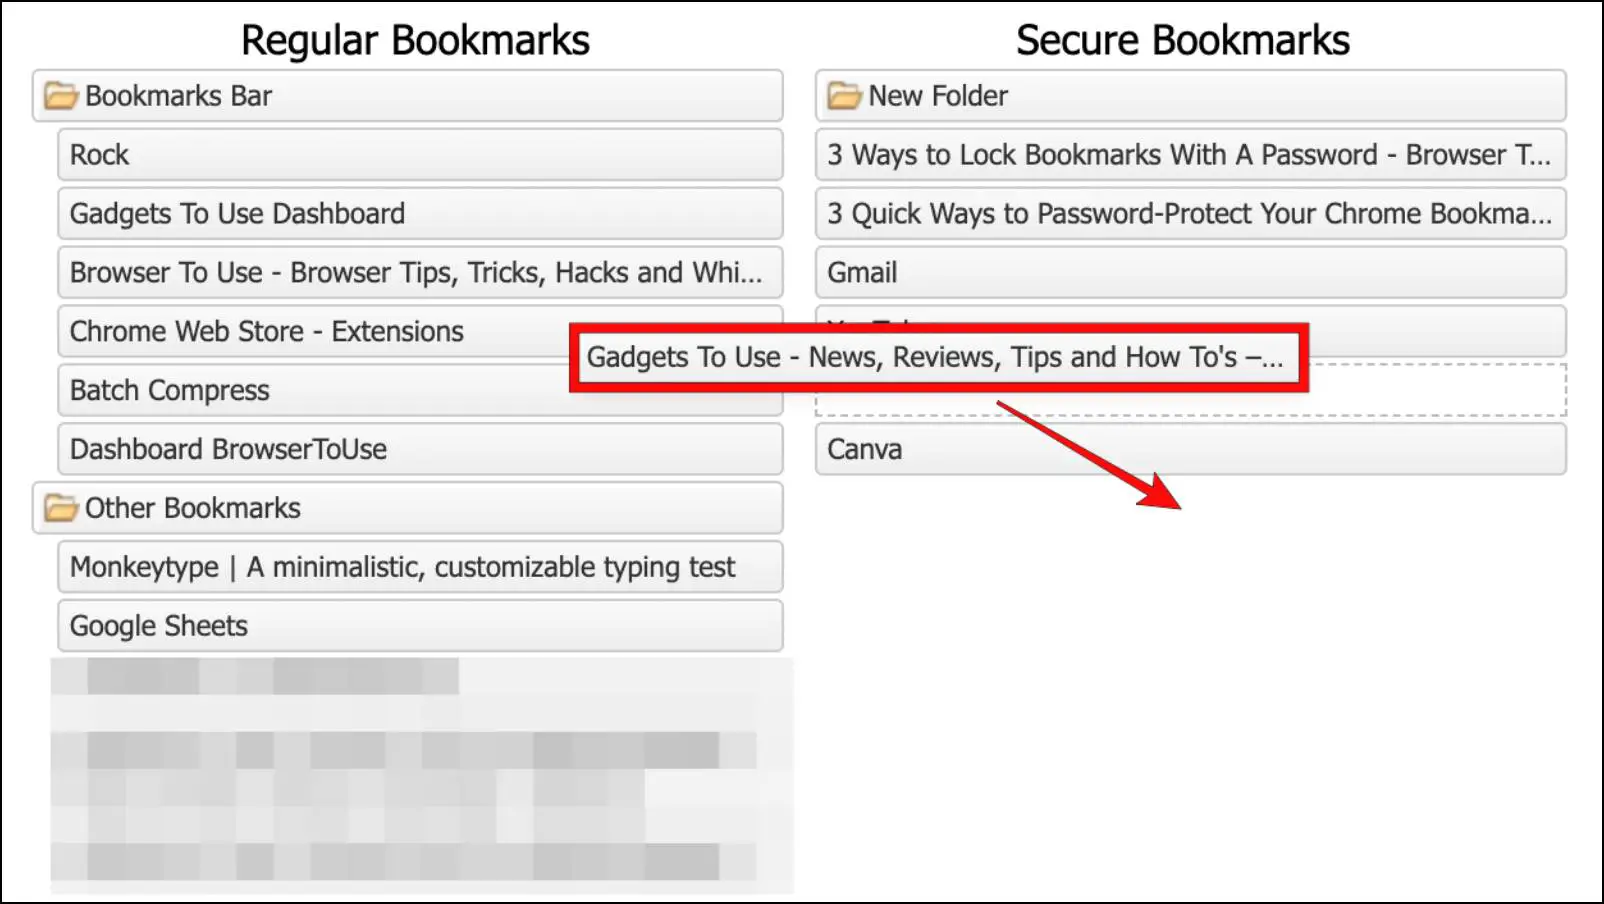 Drag Chrome Bookmarks to Secure Bookmarks